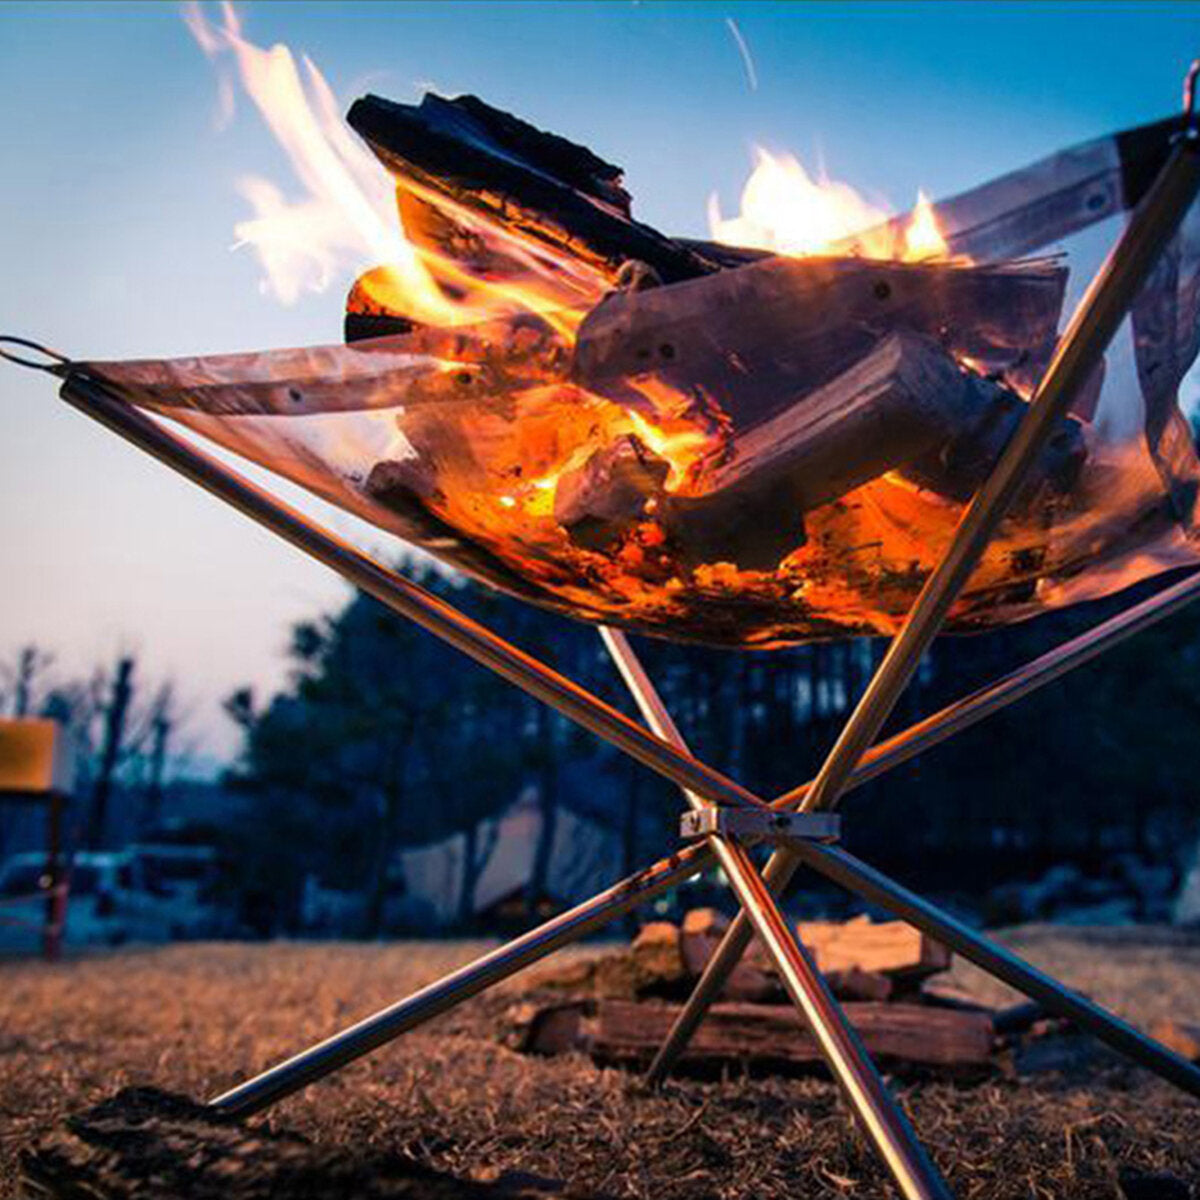 42x42x32cm Portable Fire Pit Outdoor Camping Small Size Collapsing Steel Mesh Fireplace Foldable Camping Backyard Beach Wood Burning Barbecue